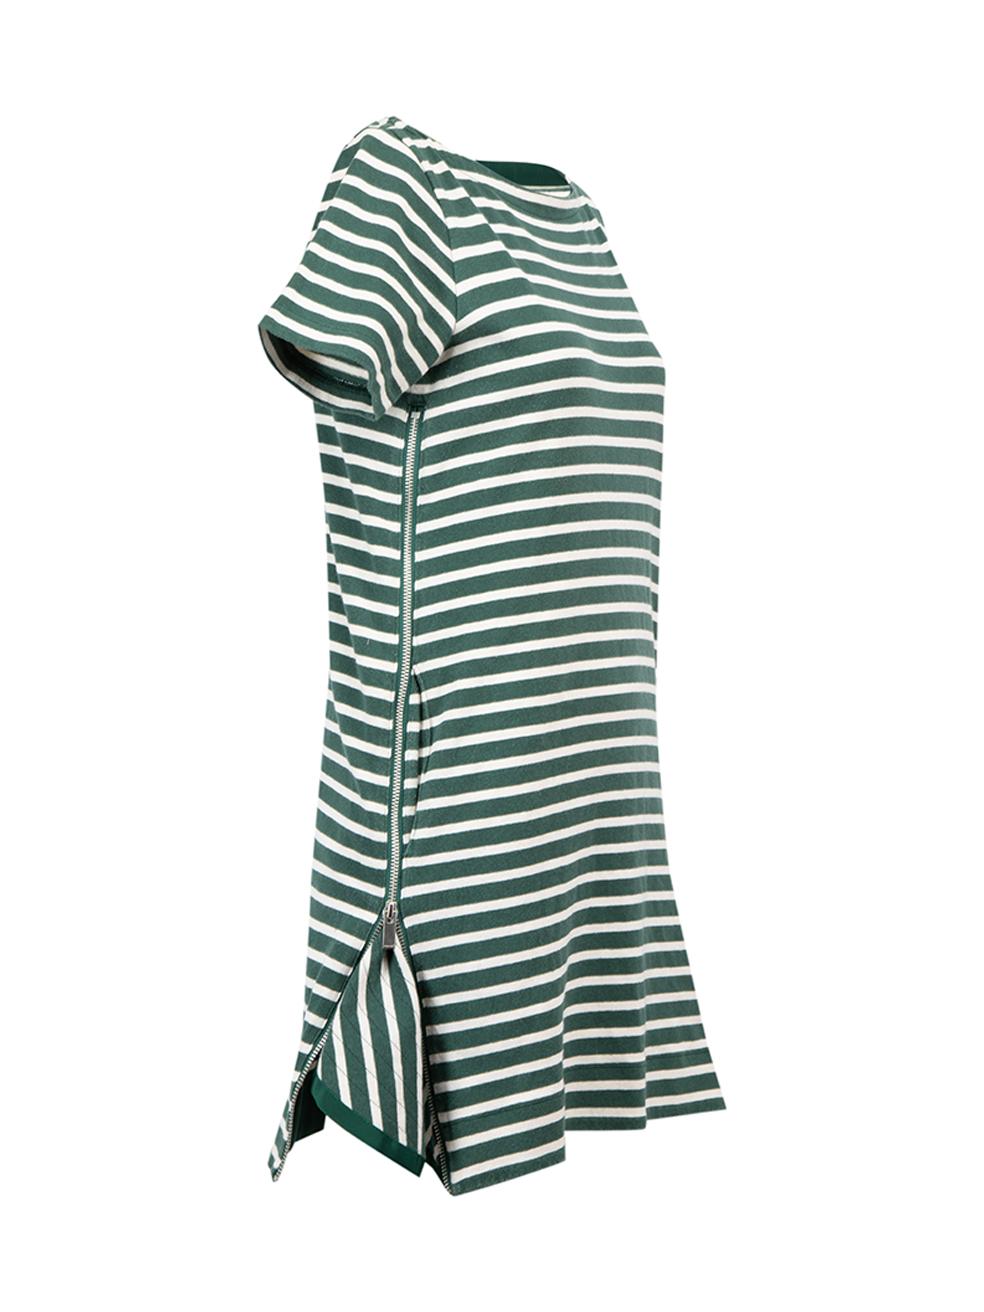 CONDITION is Very good. Hardly any visible wear to dress is evident on this used Sacai designer resale item.



Details


Green and white

Cotton

Dress

Striped pattern

Mini length

Short sleeves

Side zip opening detail

Round neckline

2x Side